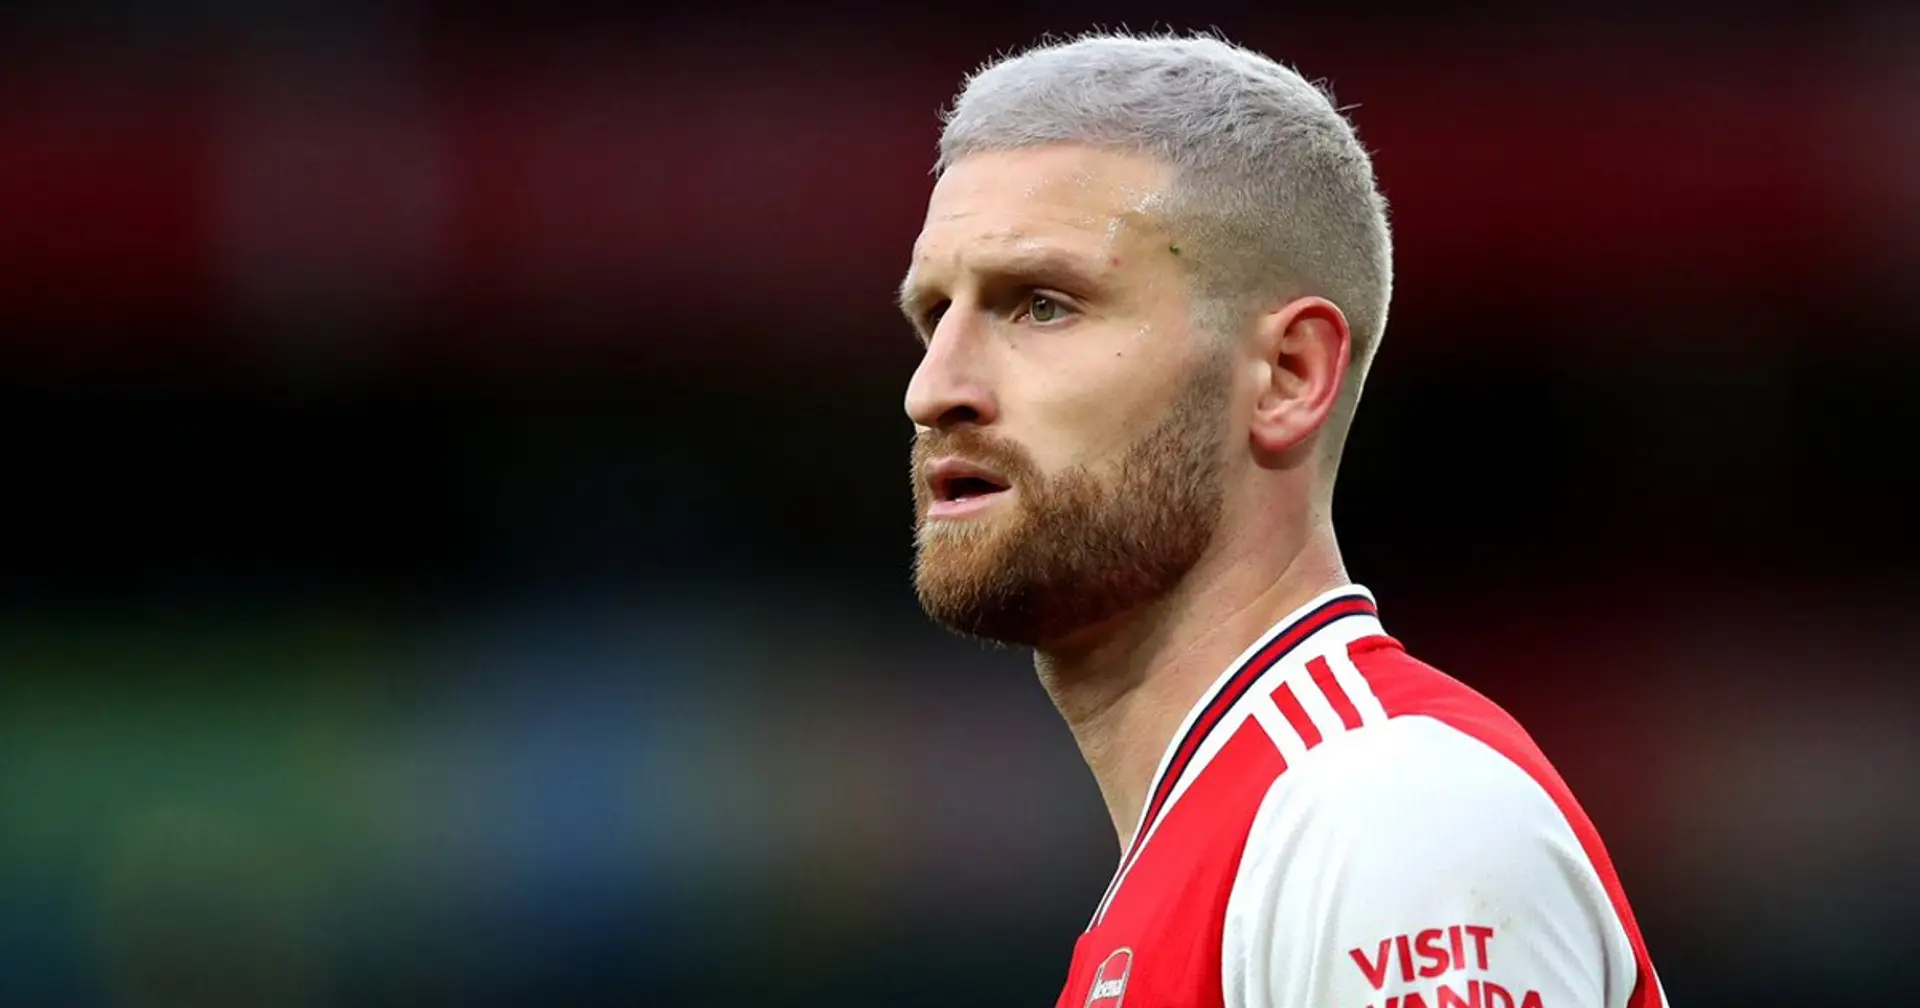 Almost as good as in 2016/17: crunching the numbers behind Mustafi's recent revival